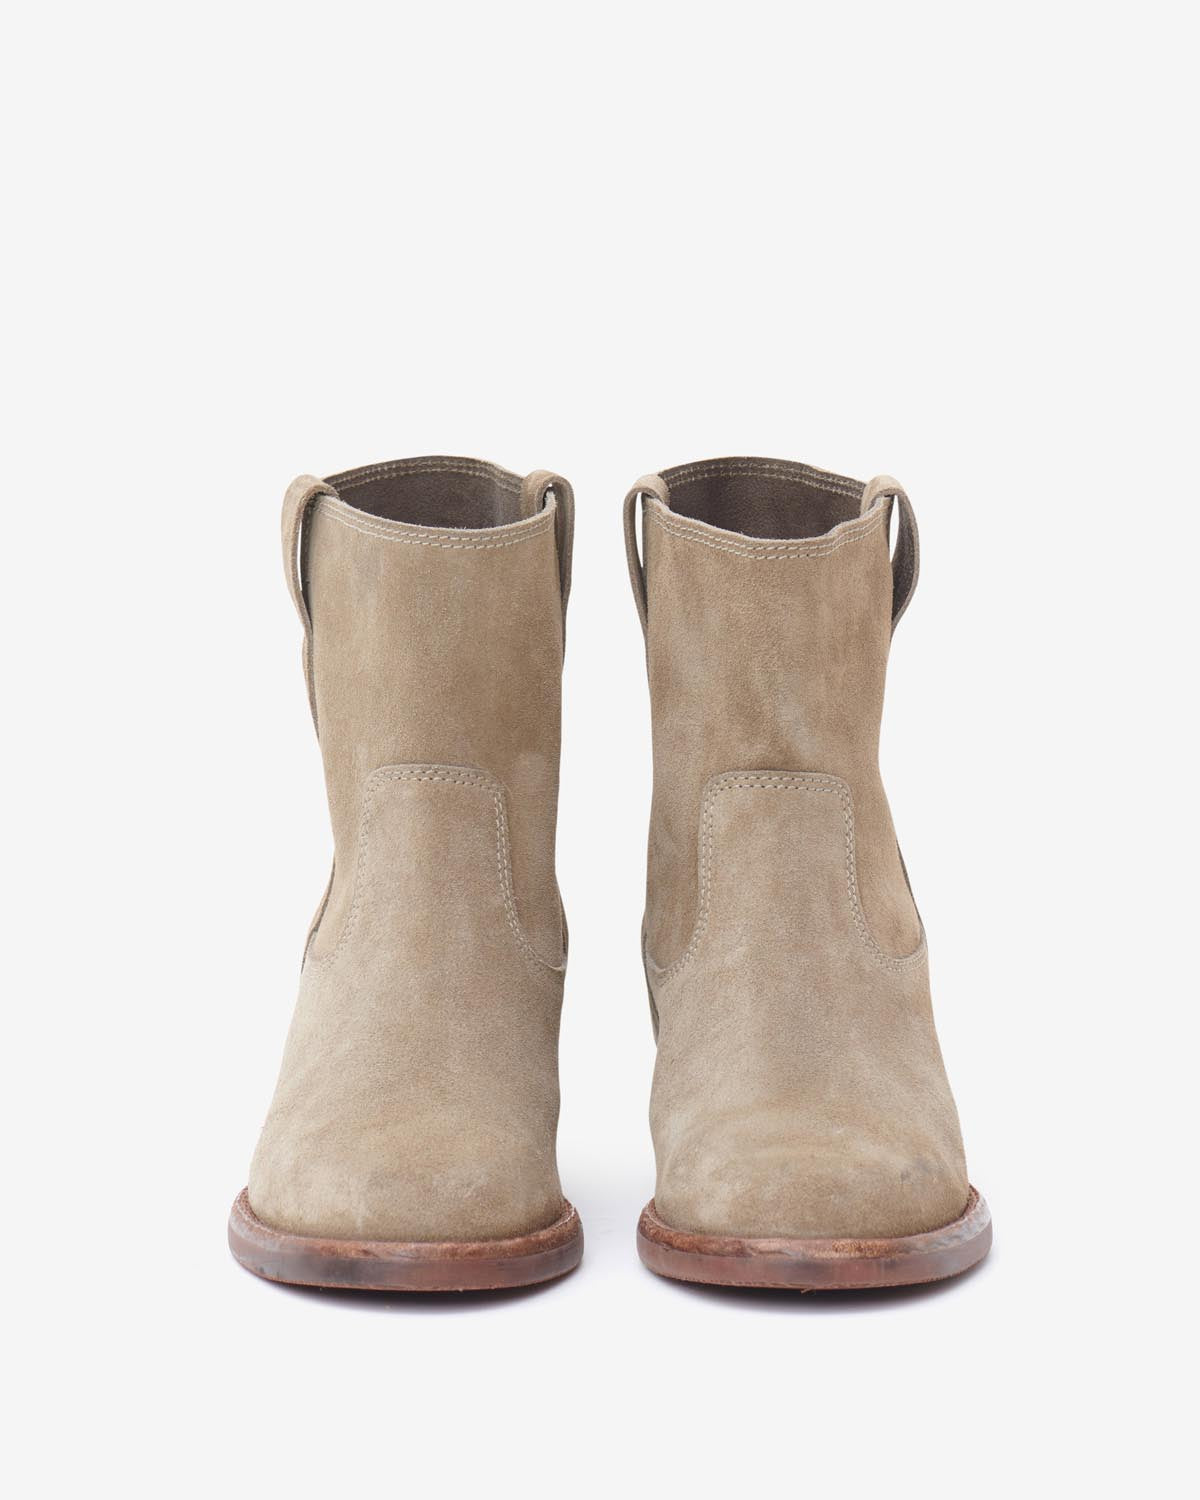 Boots susee Woman Taupe 1